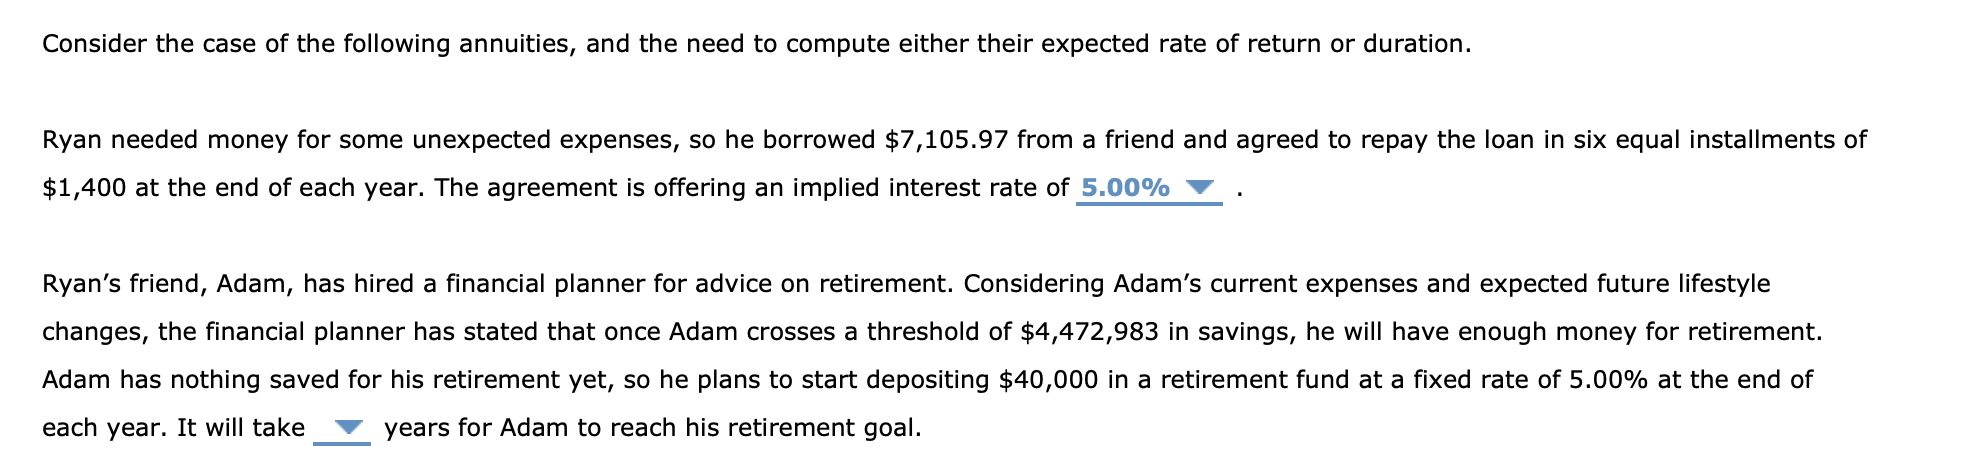 Consider the case of the following annuities, and the need to compute either their expected rate of return or